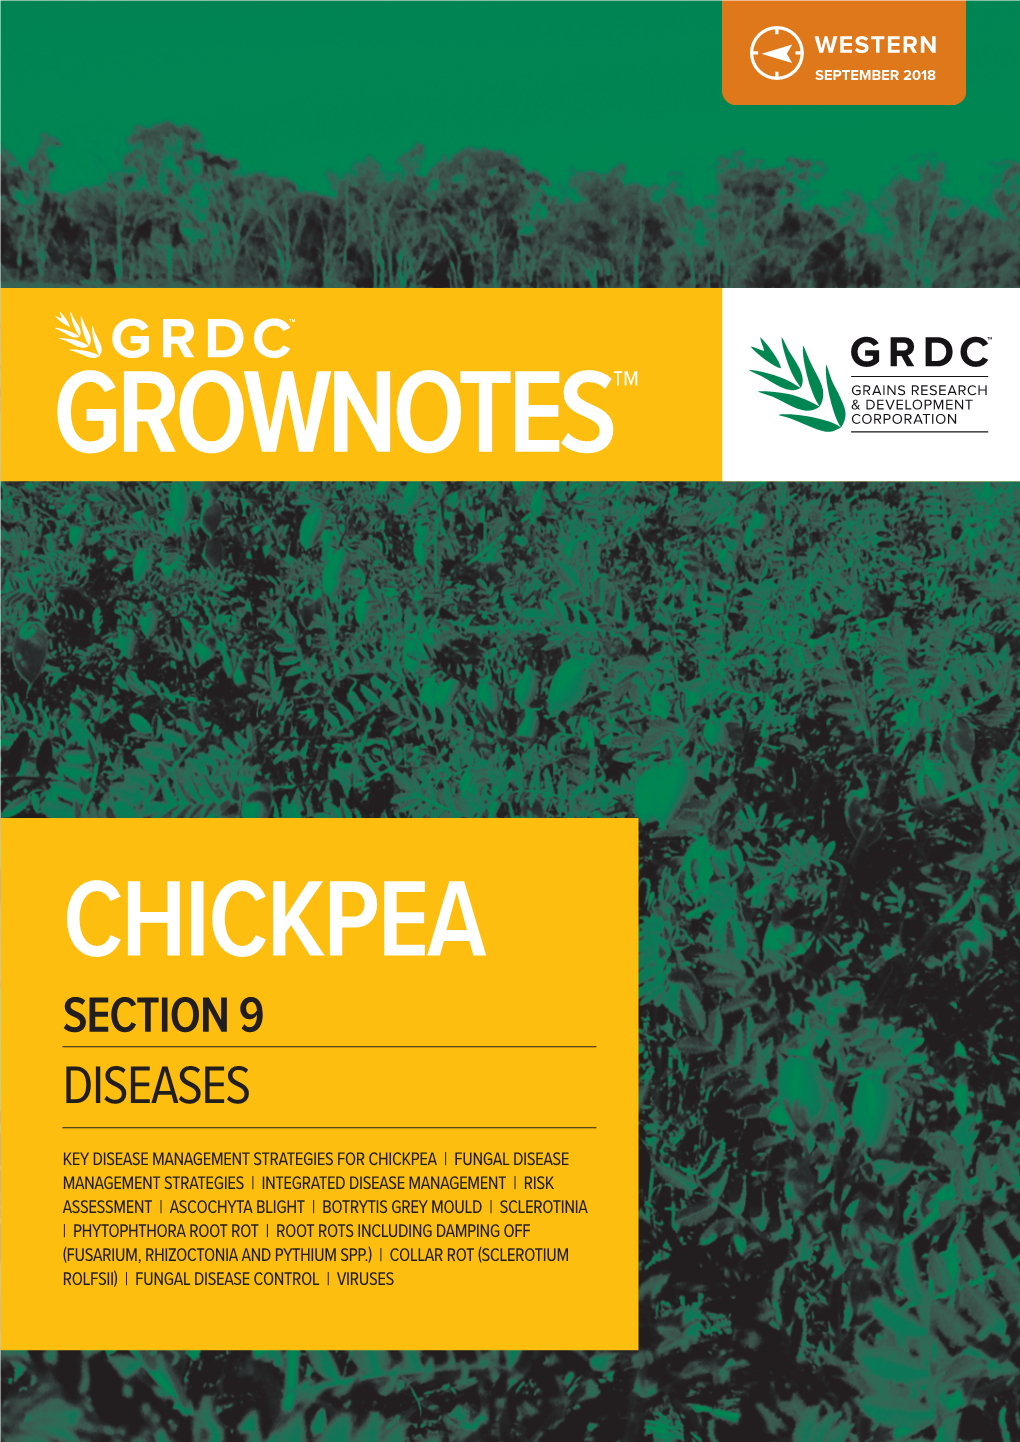 Chickpea Section 9 Diseases